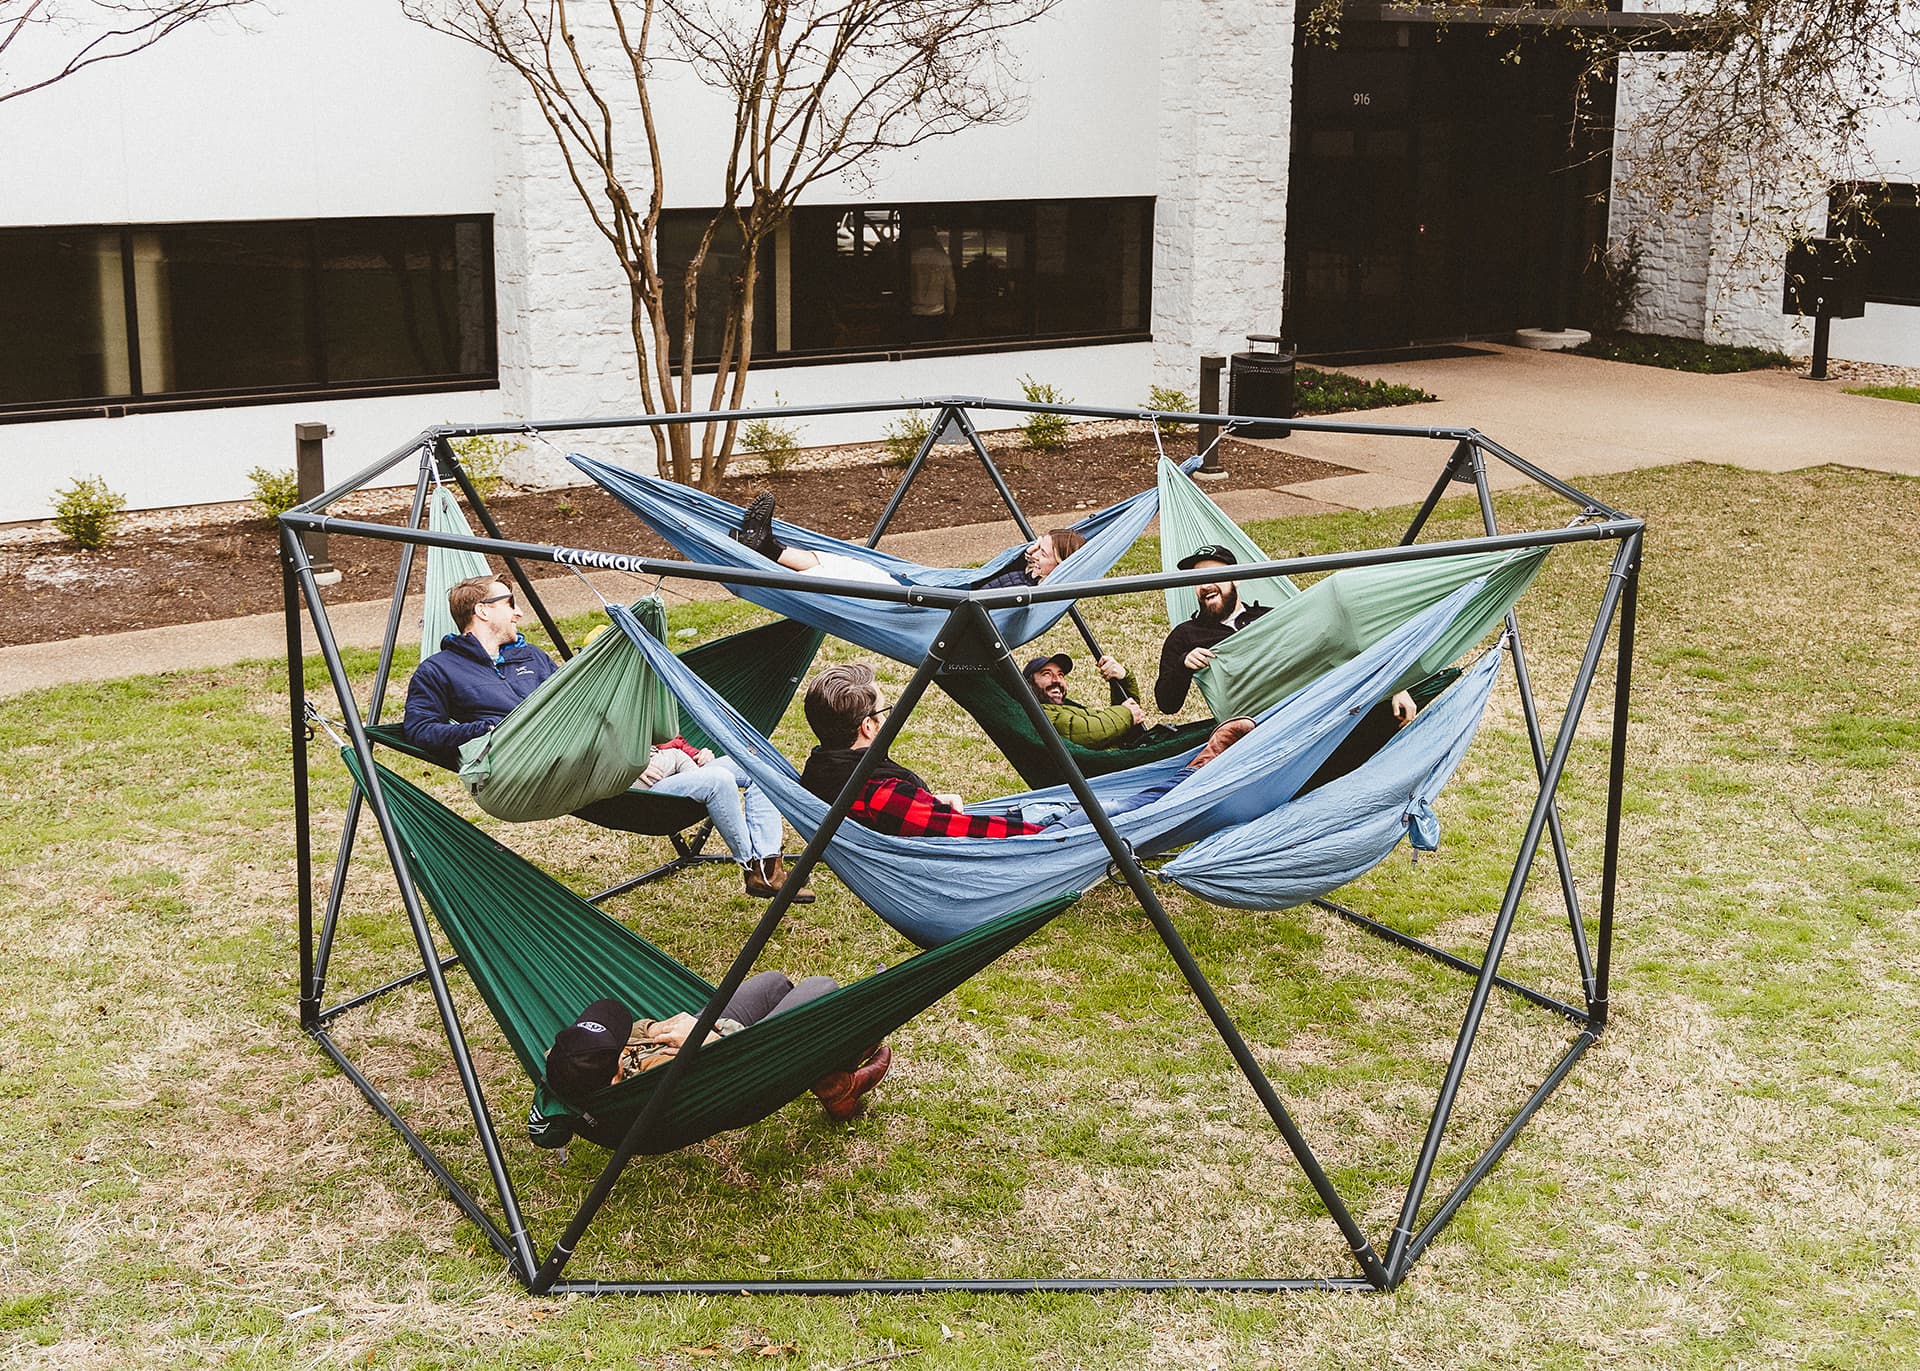 Weaver encourages people to get outside and feel restored with attachment points for 8 hammocks that make setup a breeze.